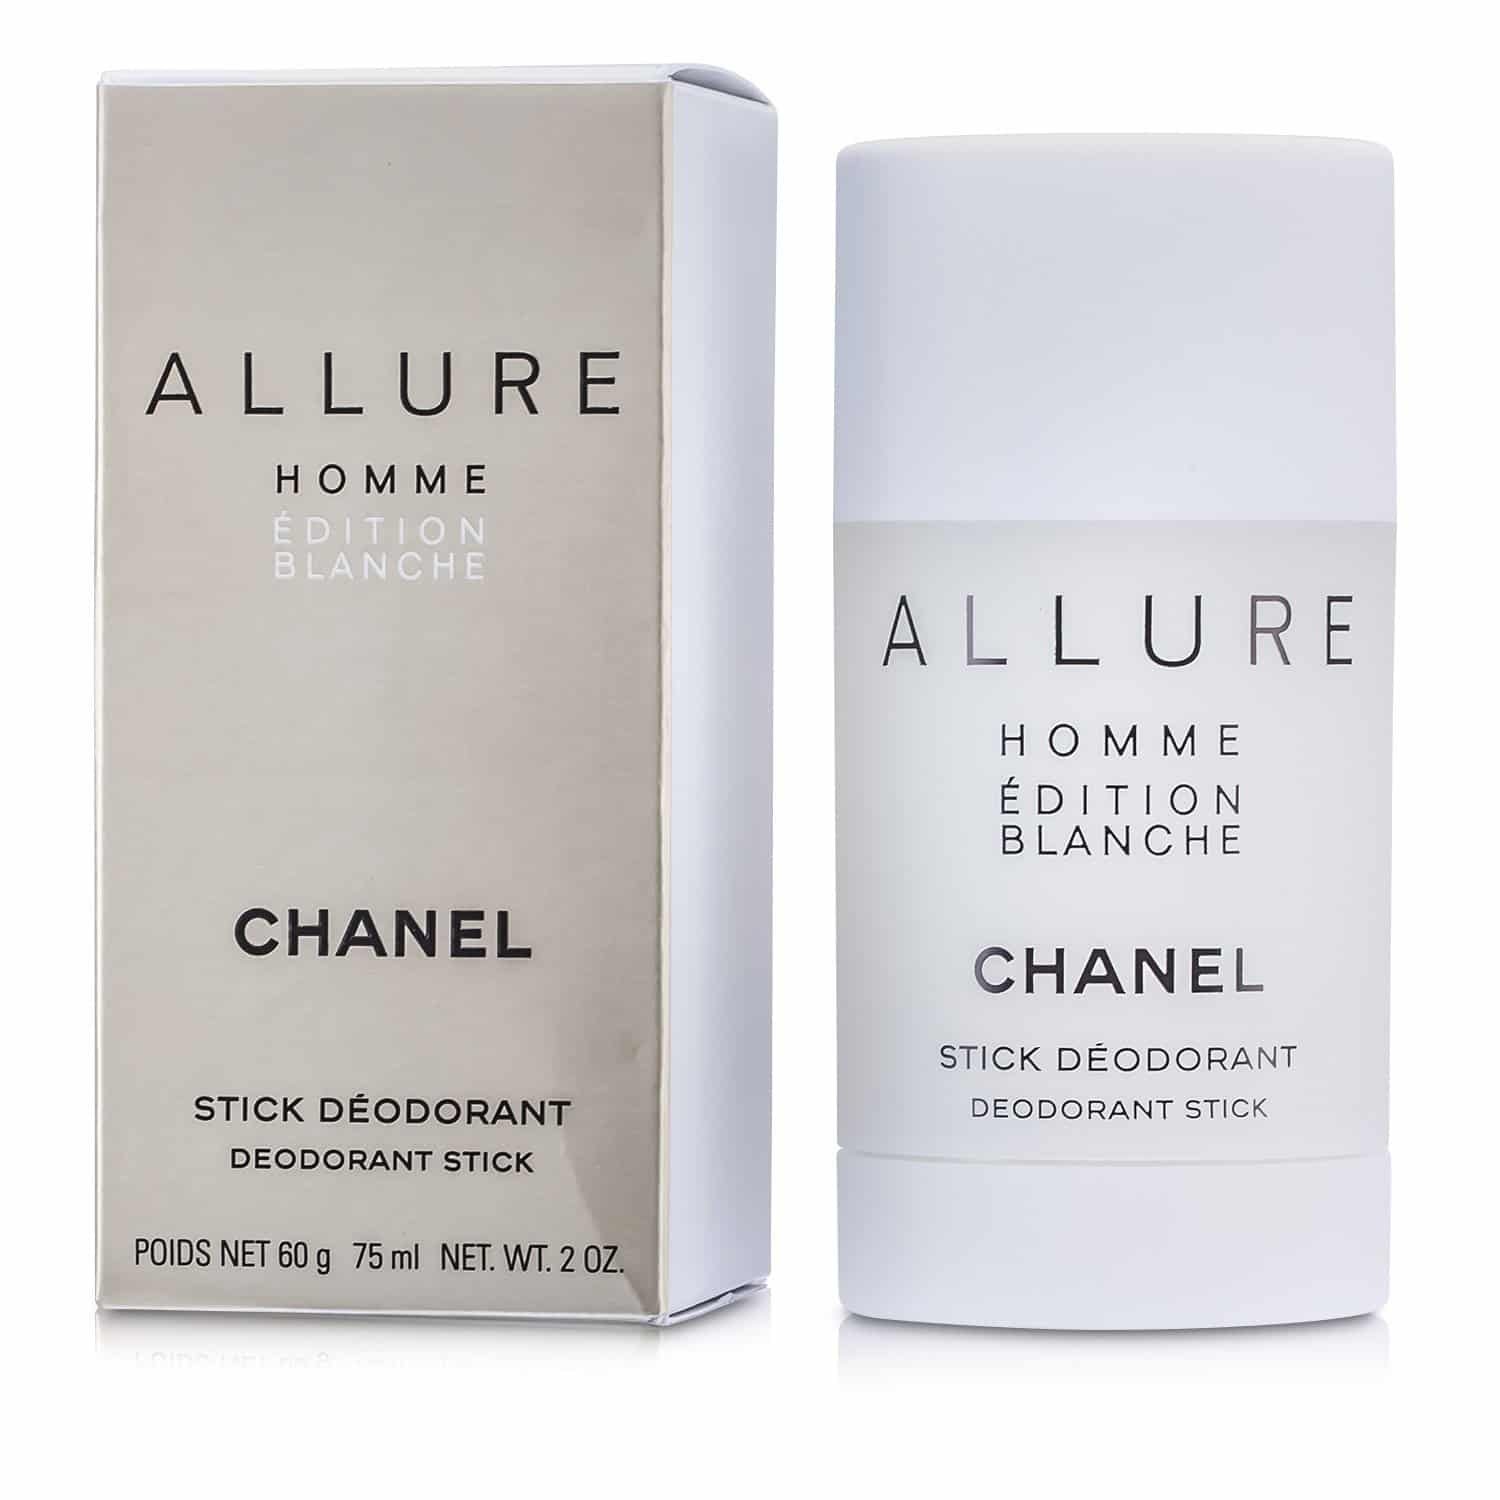 Chanel Allure Homme Edition